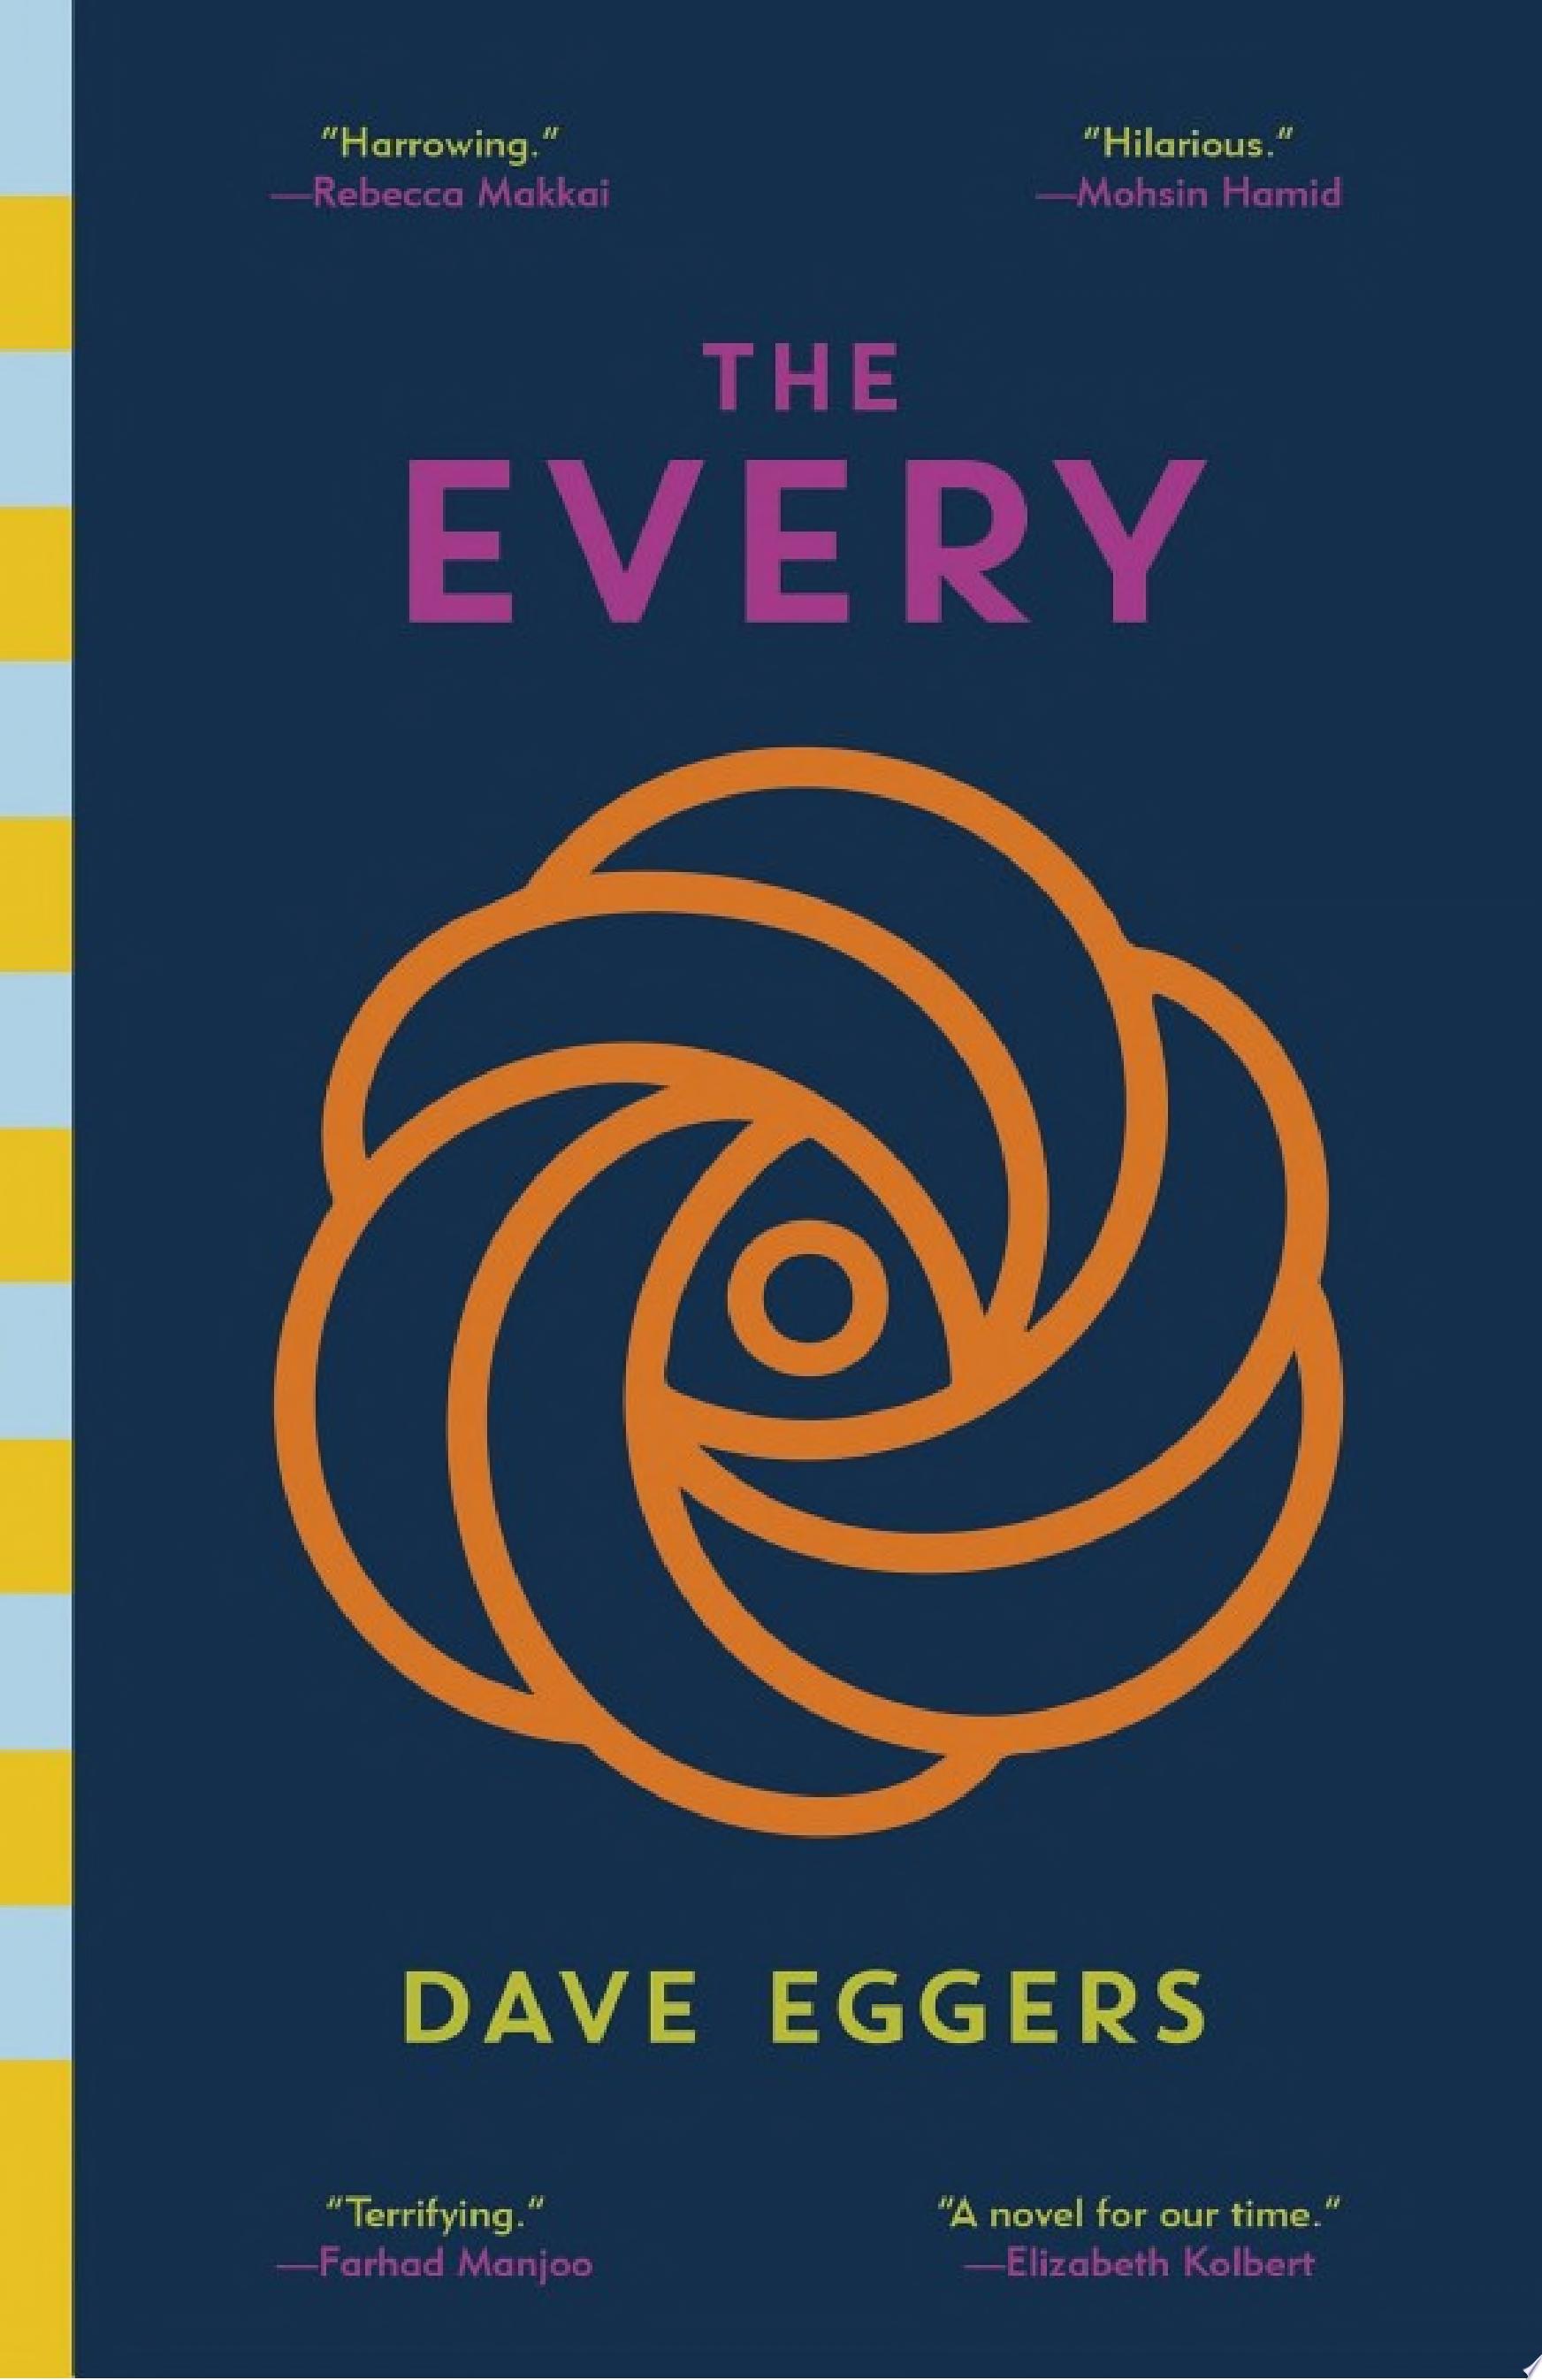 Image for "The Every"